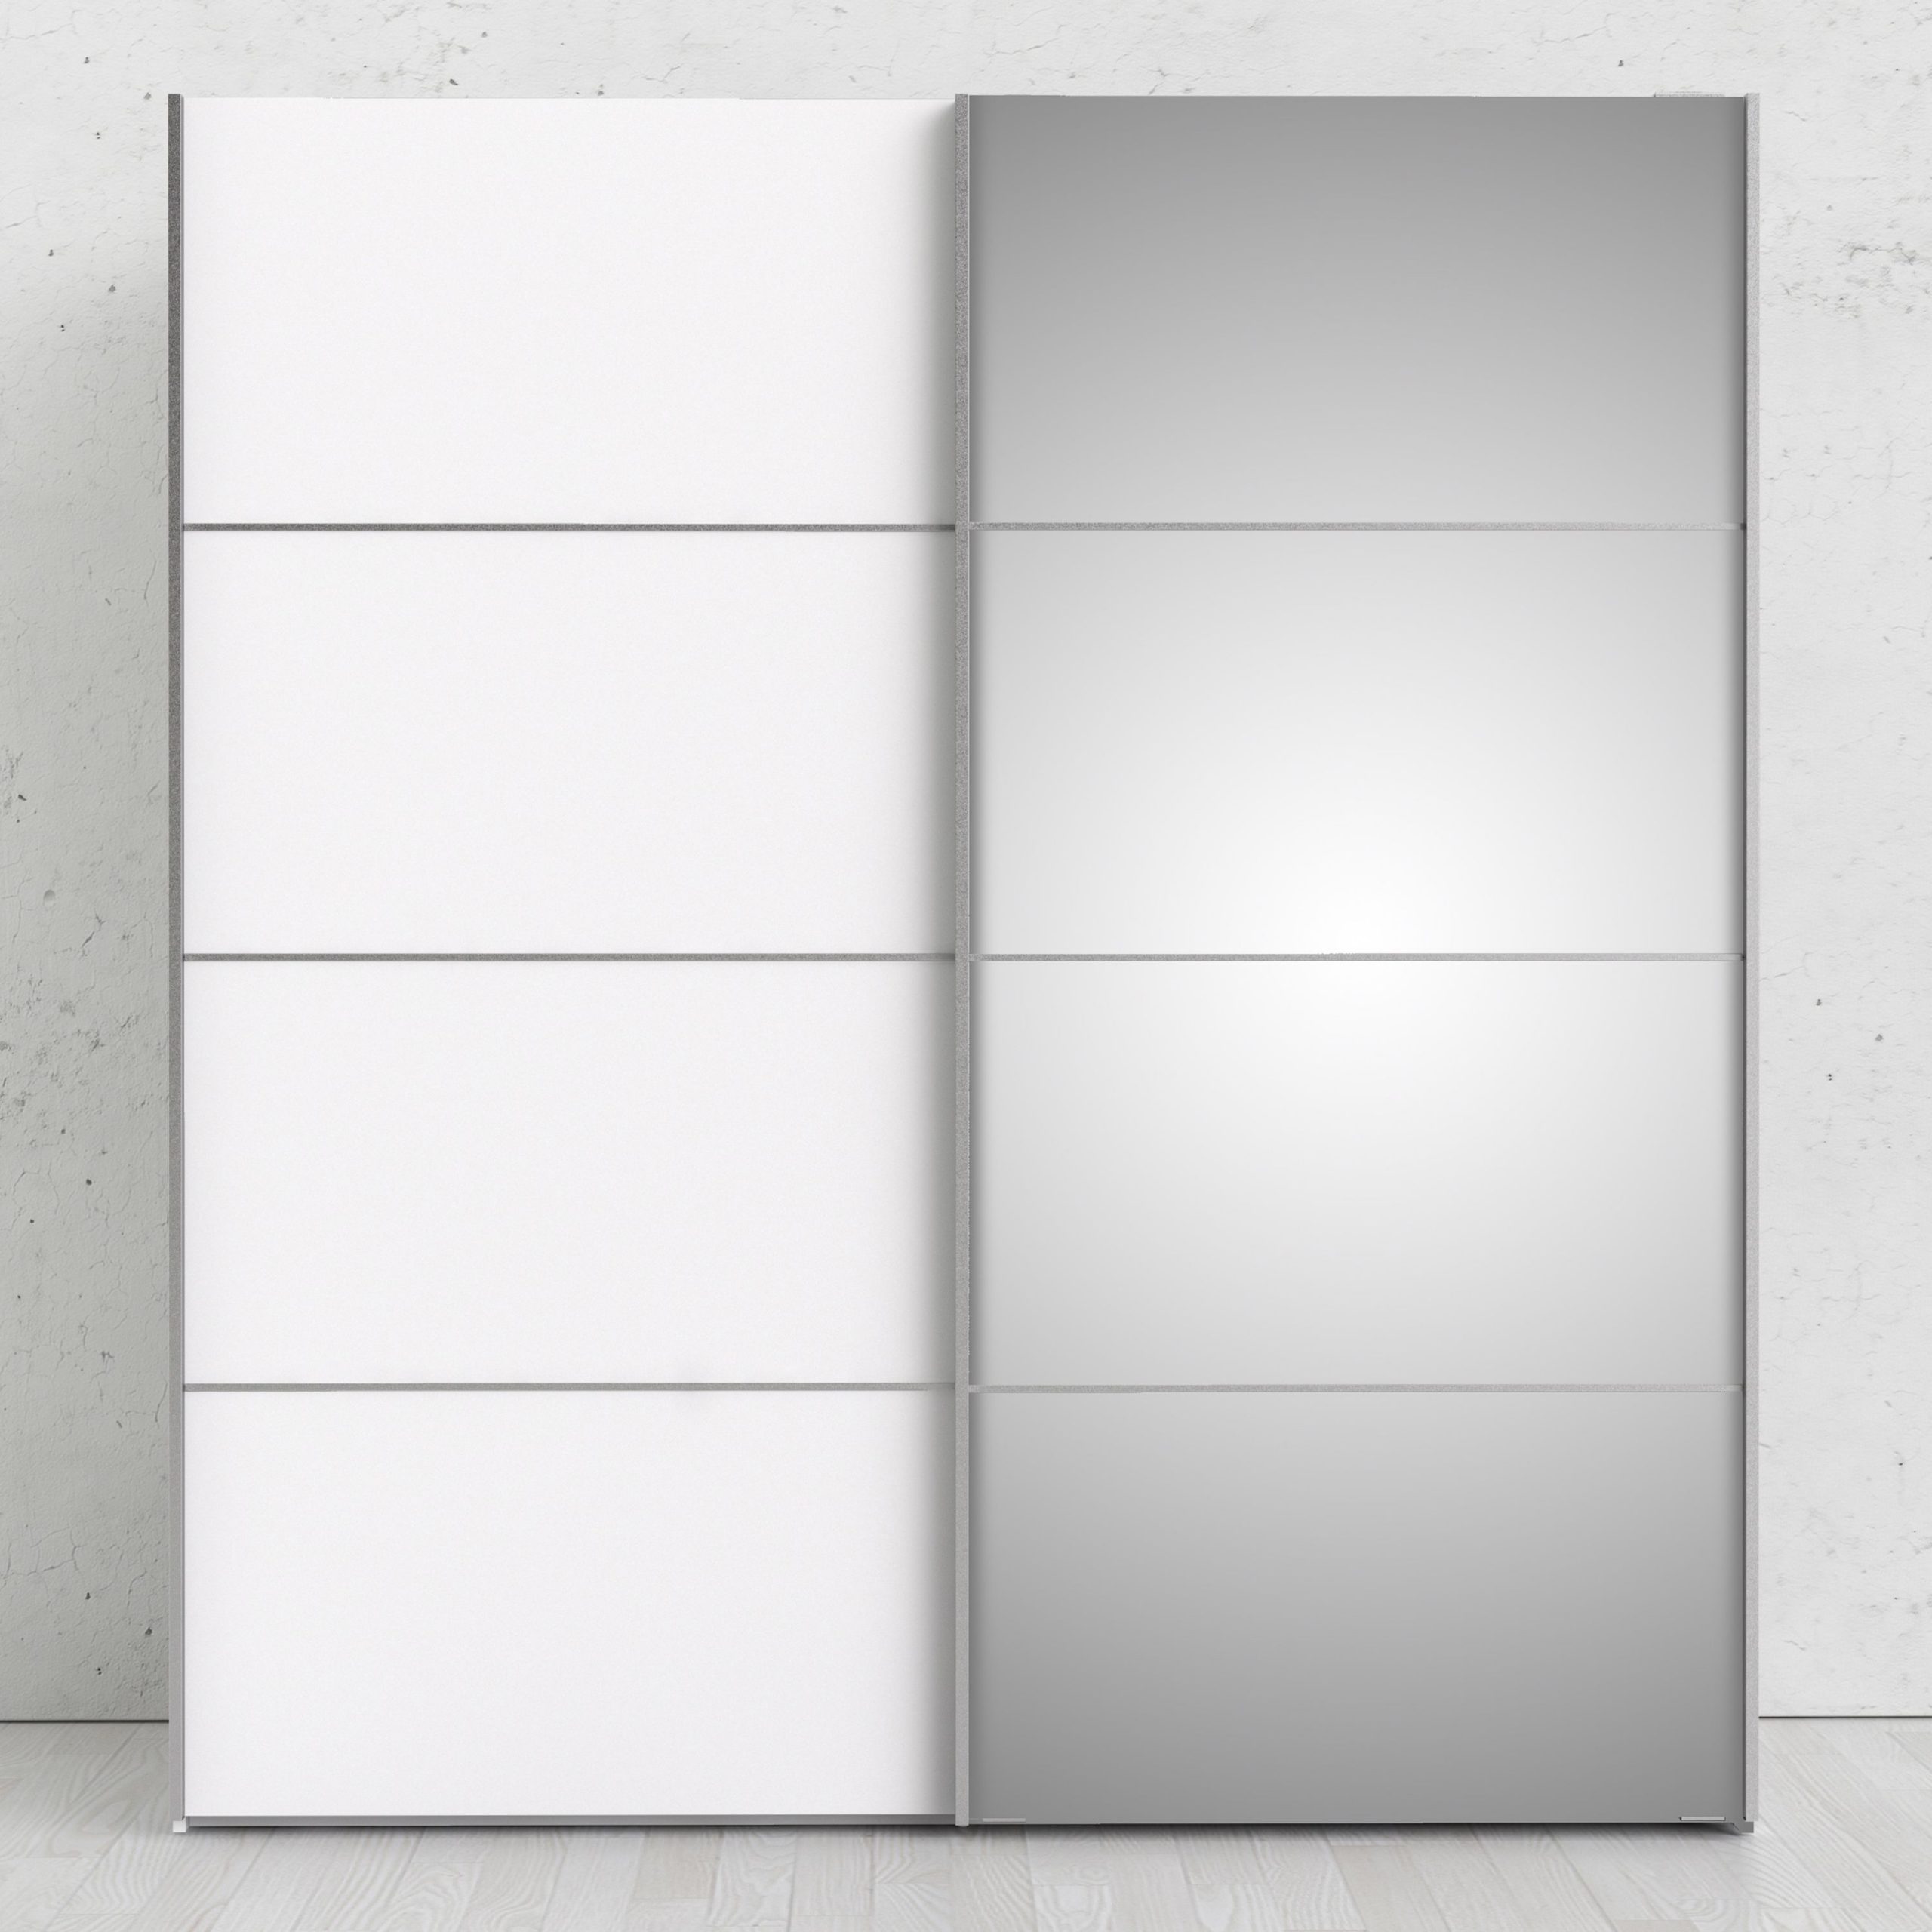 Verona Sliding Wardrobe 180cm In White With White And Mirror Doors With 2 Shelves